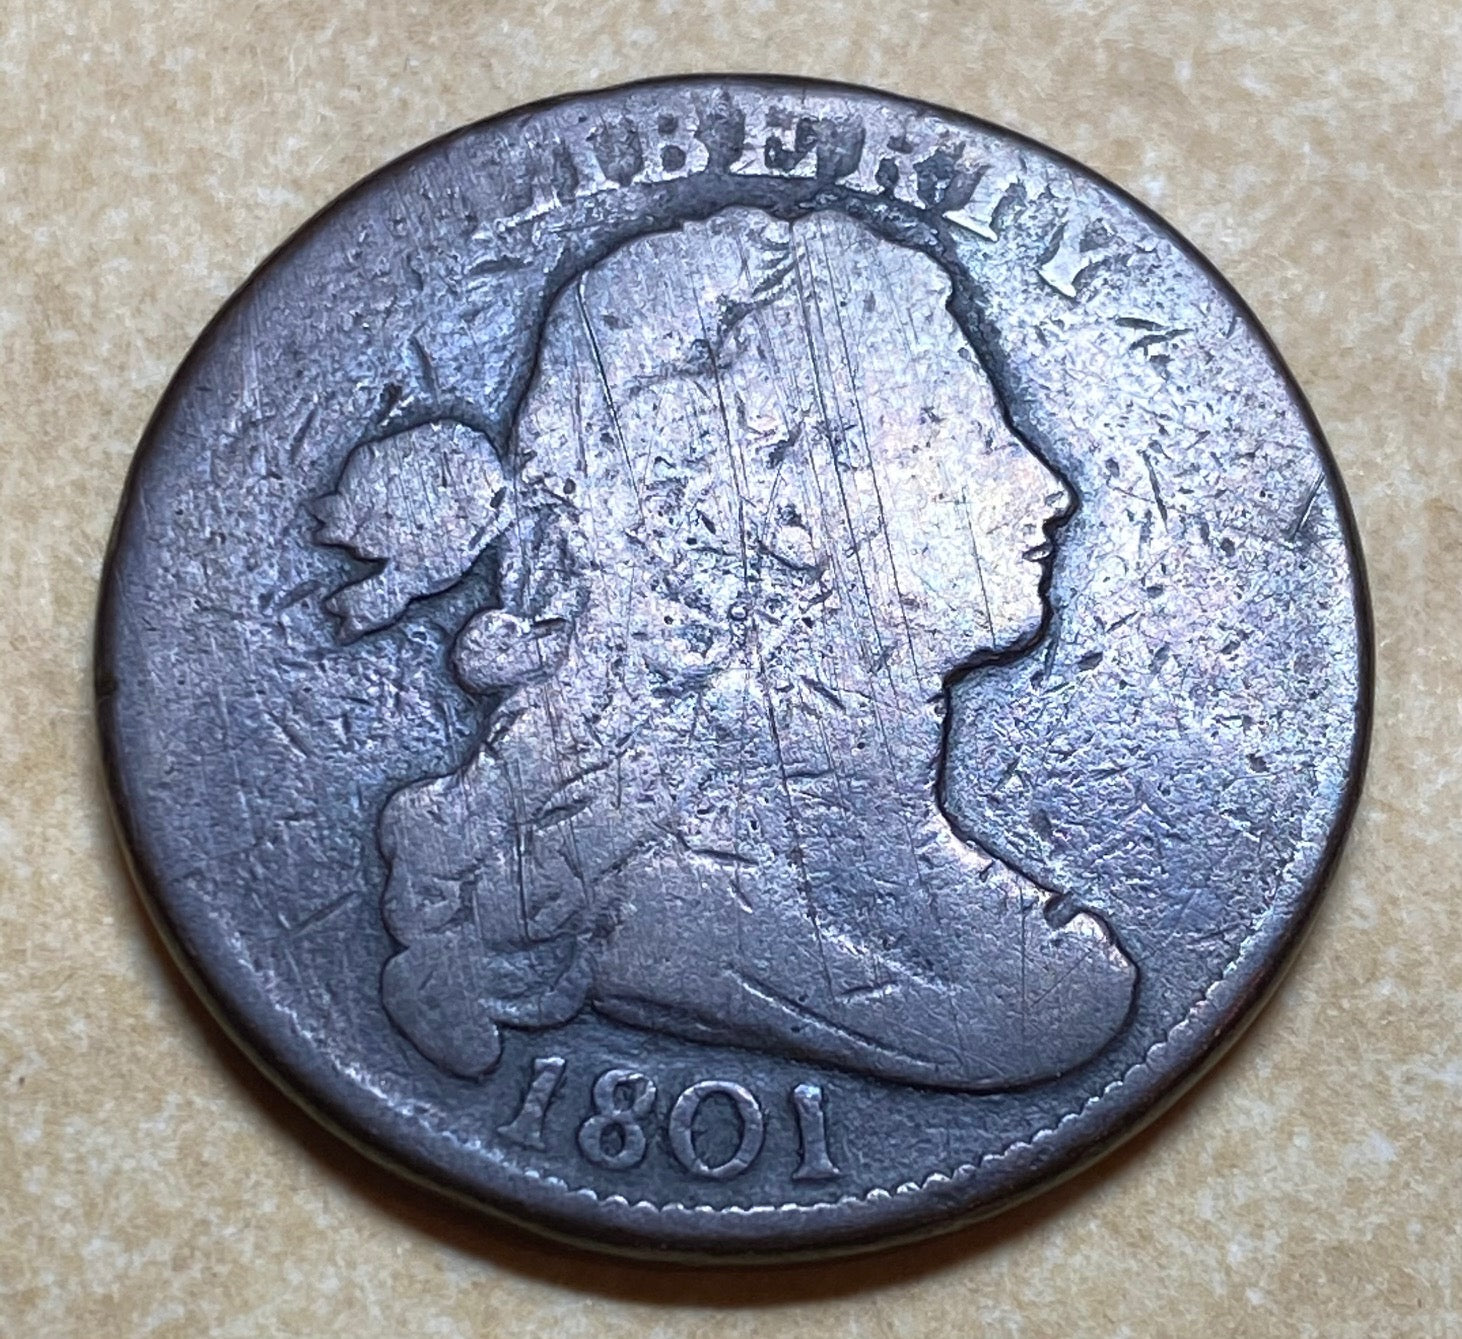 An 1801 U.S. DRAPED BUST LARGE CENT, 1 over 000 ERROR – Tortuga